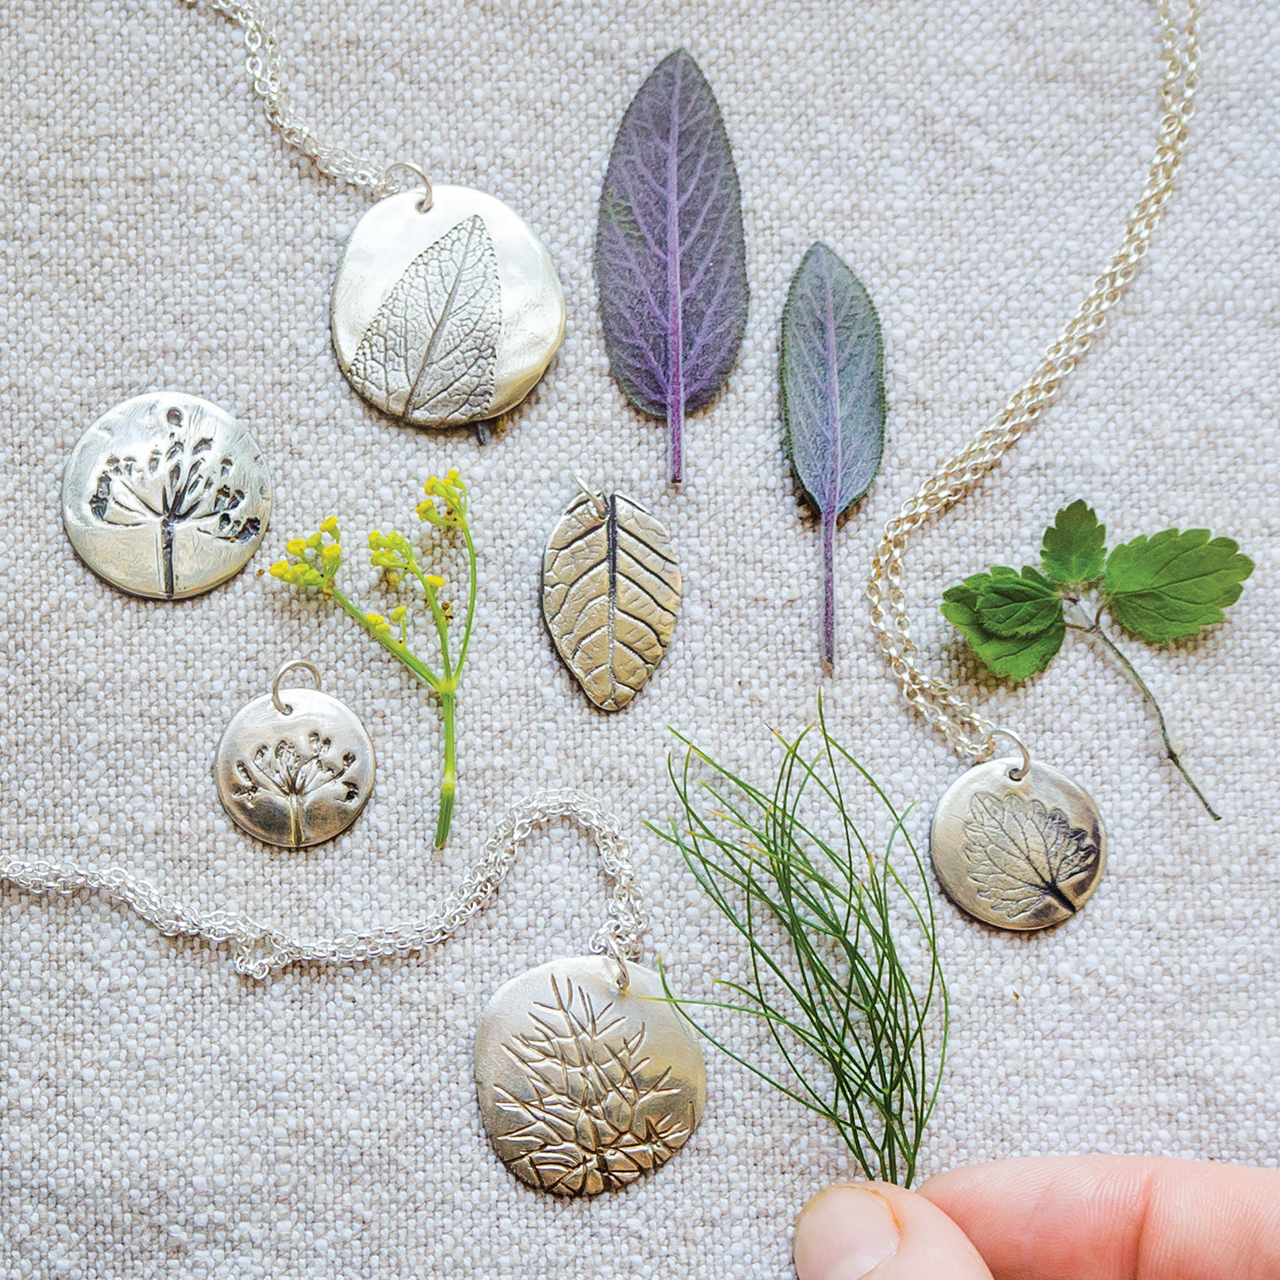 Silver Fossil Pendants from 'Making Winter' by Emma Mitchell.